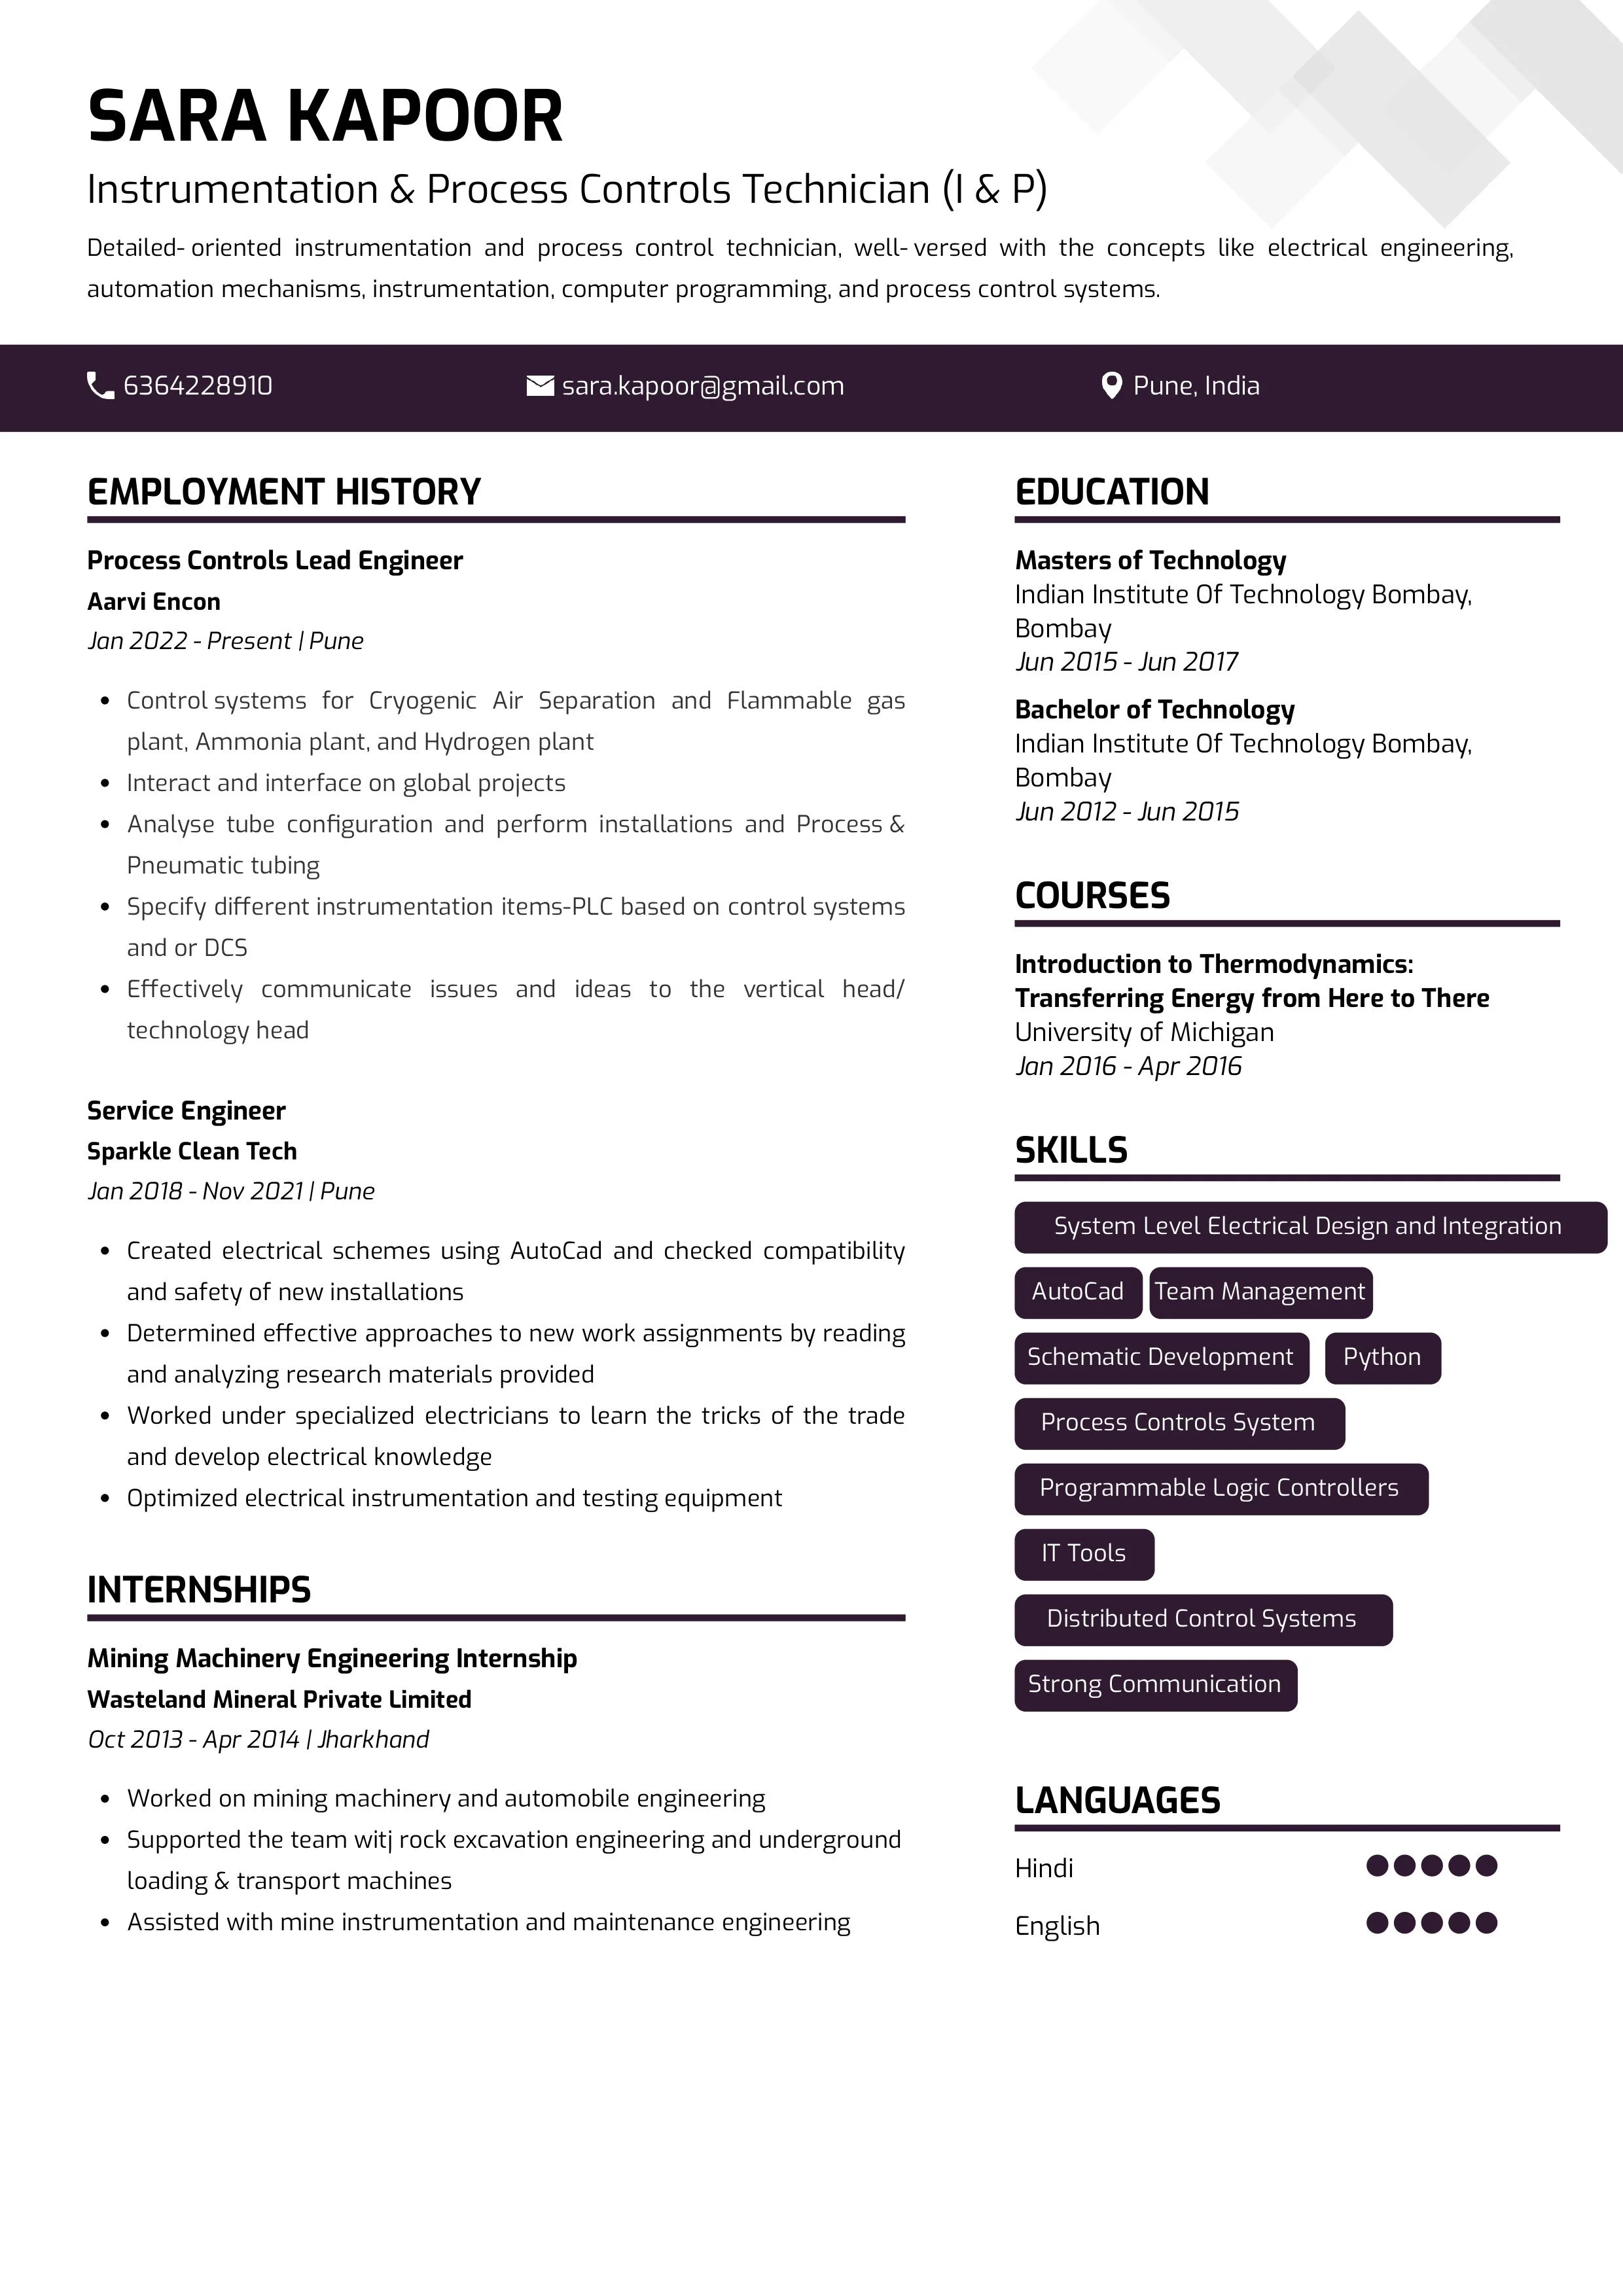 Sample Resume of Instrument and Process Control Technician | Free Resume Templates & Samples on Resumod.co